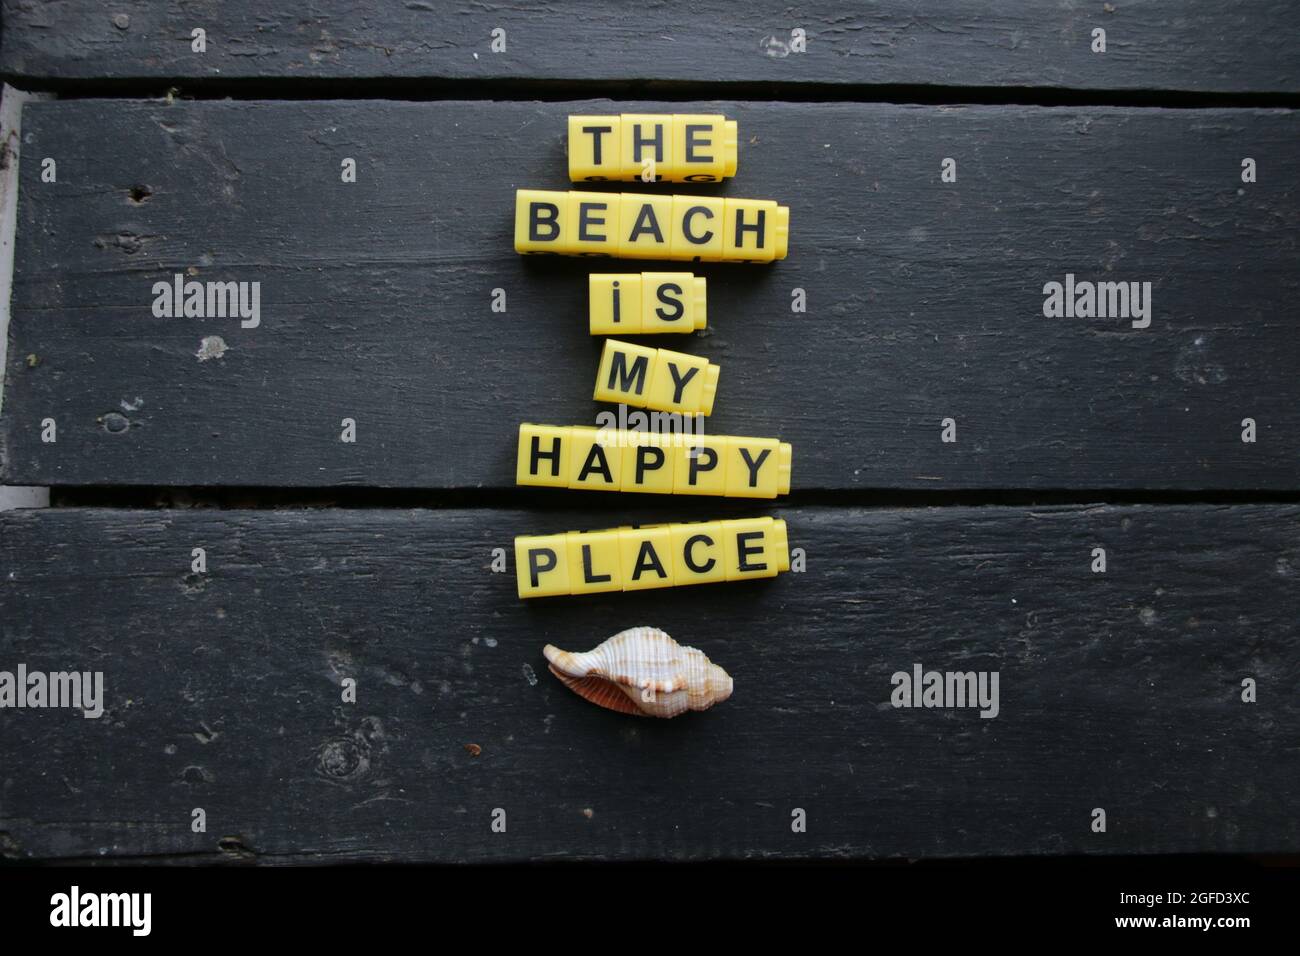 the beach is my happy place Stock Photo